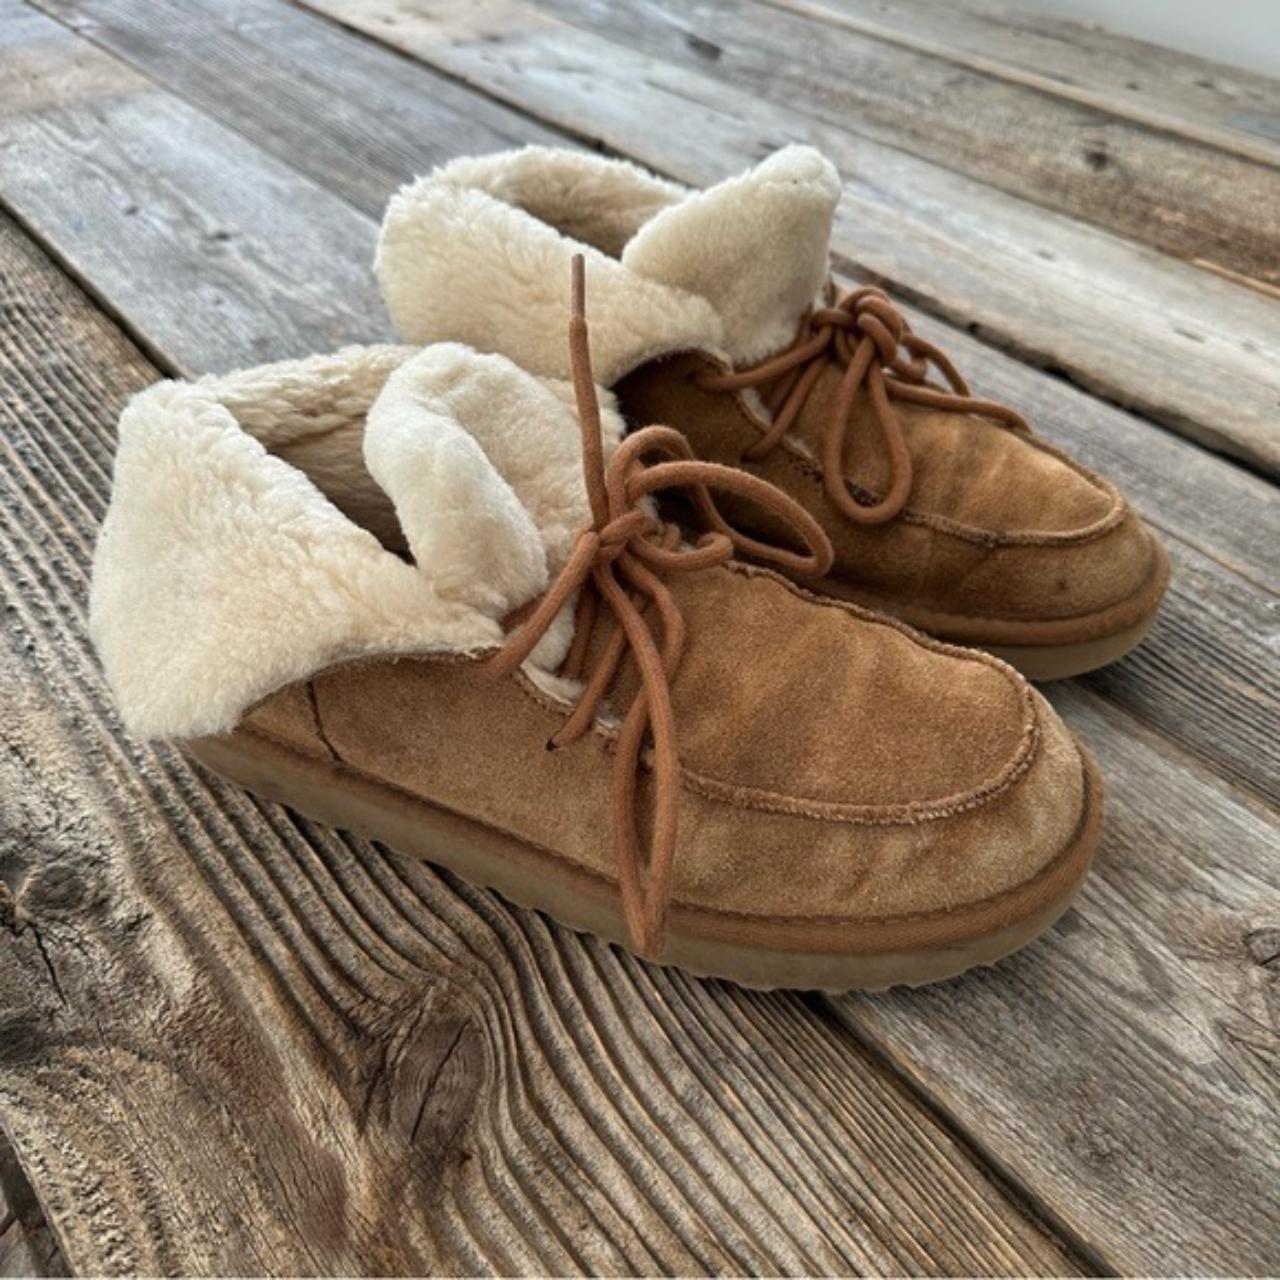 UGG Diara Foldover Suede Lace Up Booties Has some... - Depop